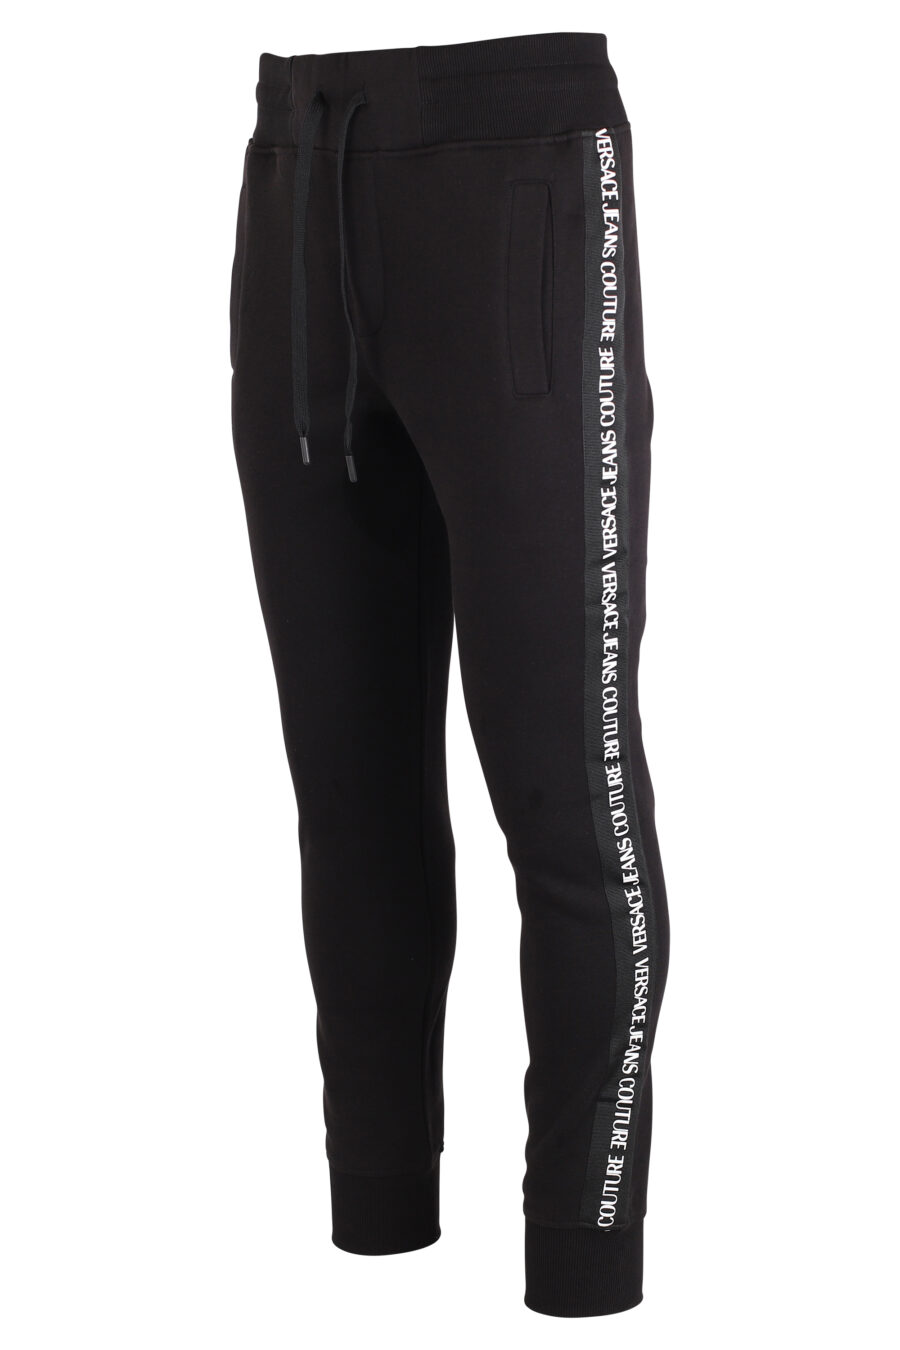 Tracksuit bottoms black with vertical mini logo - IMG 4088